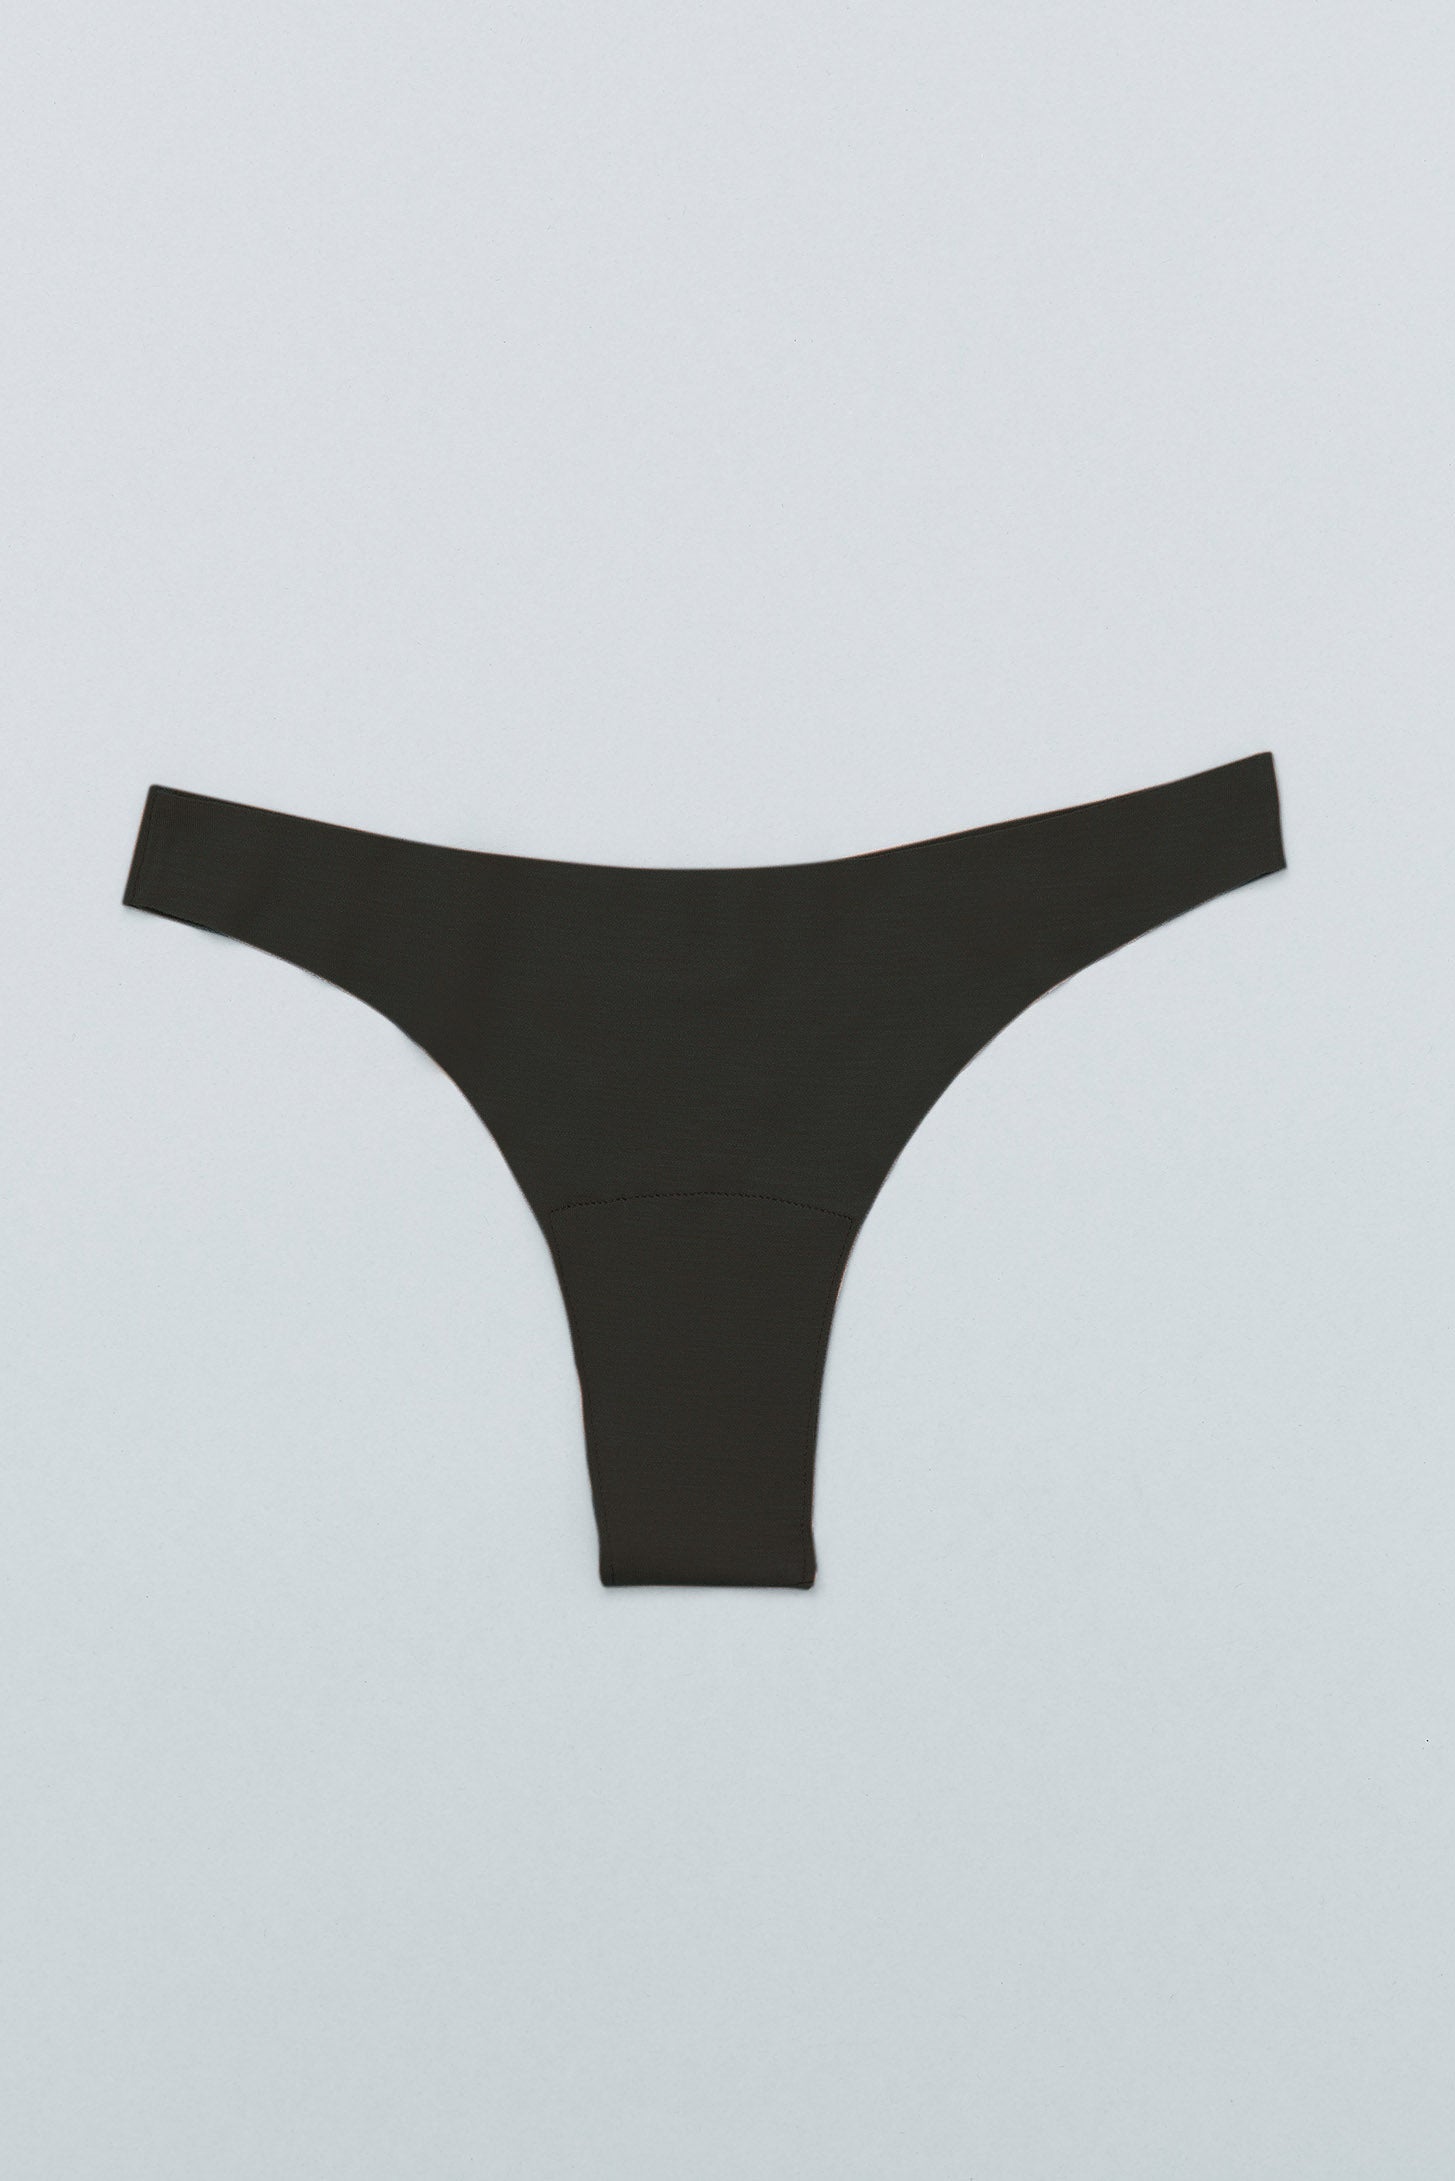 Thong in black made of Tencel modal from moi-basics